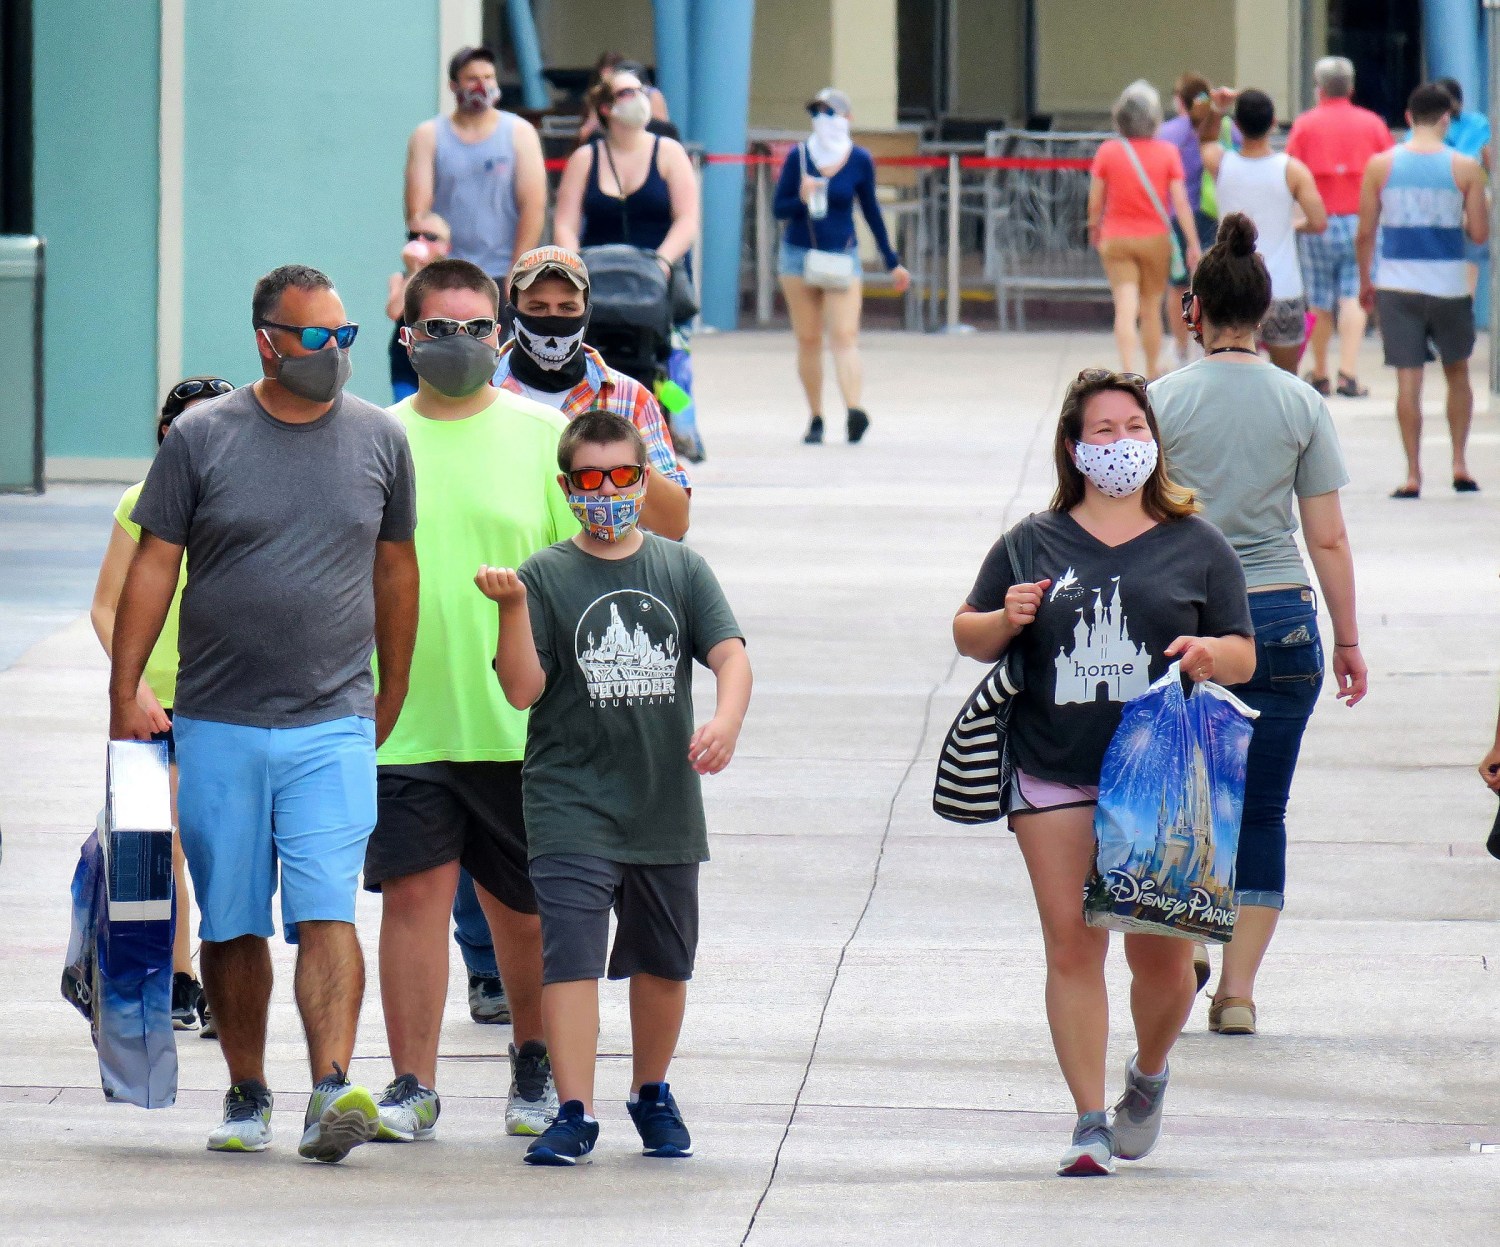 Guests wear face masks while visiting the Disney Springs shopping and dining district in Lake Buena Vista, Fla., Wednesday, June 17, 2020. The Florida Department of Health reported 3,207 new cases of Covid-19 on Thursday, marking a record daily high for Florida since the pandemic began. (Joe Burbank/Orlando Sentinel/TNS/ABACAPRESS.COM - NO FILM, NO VIDEO, NO TV, NO DOCUMENTARY)